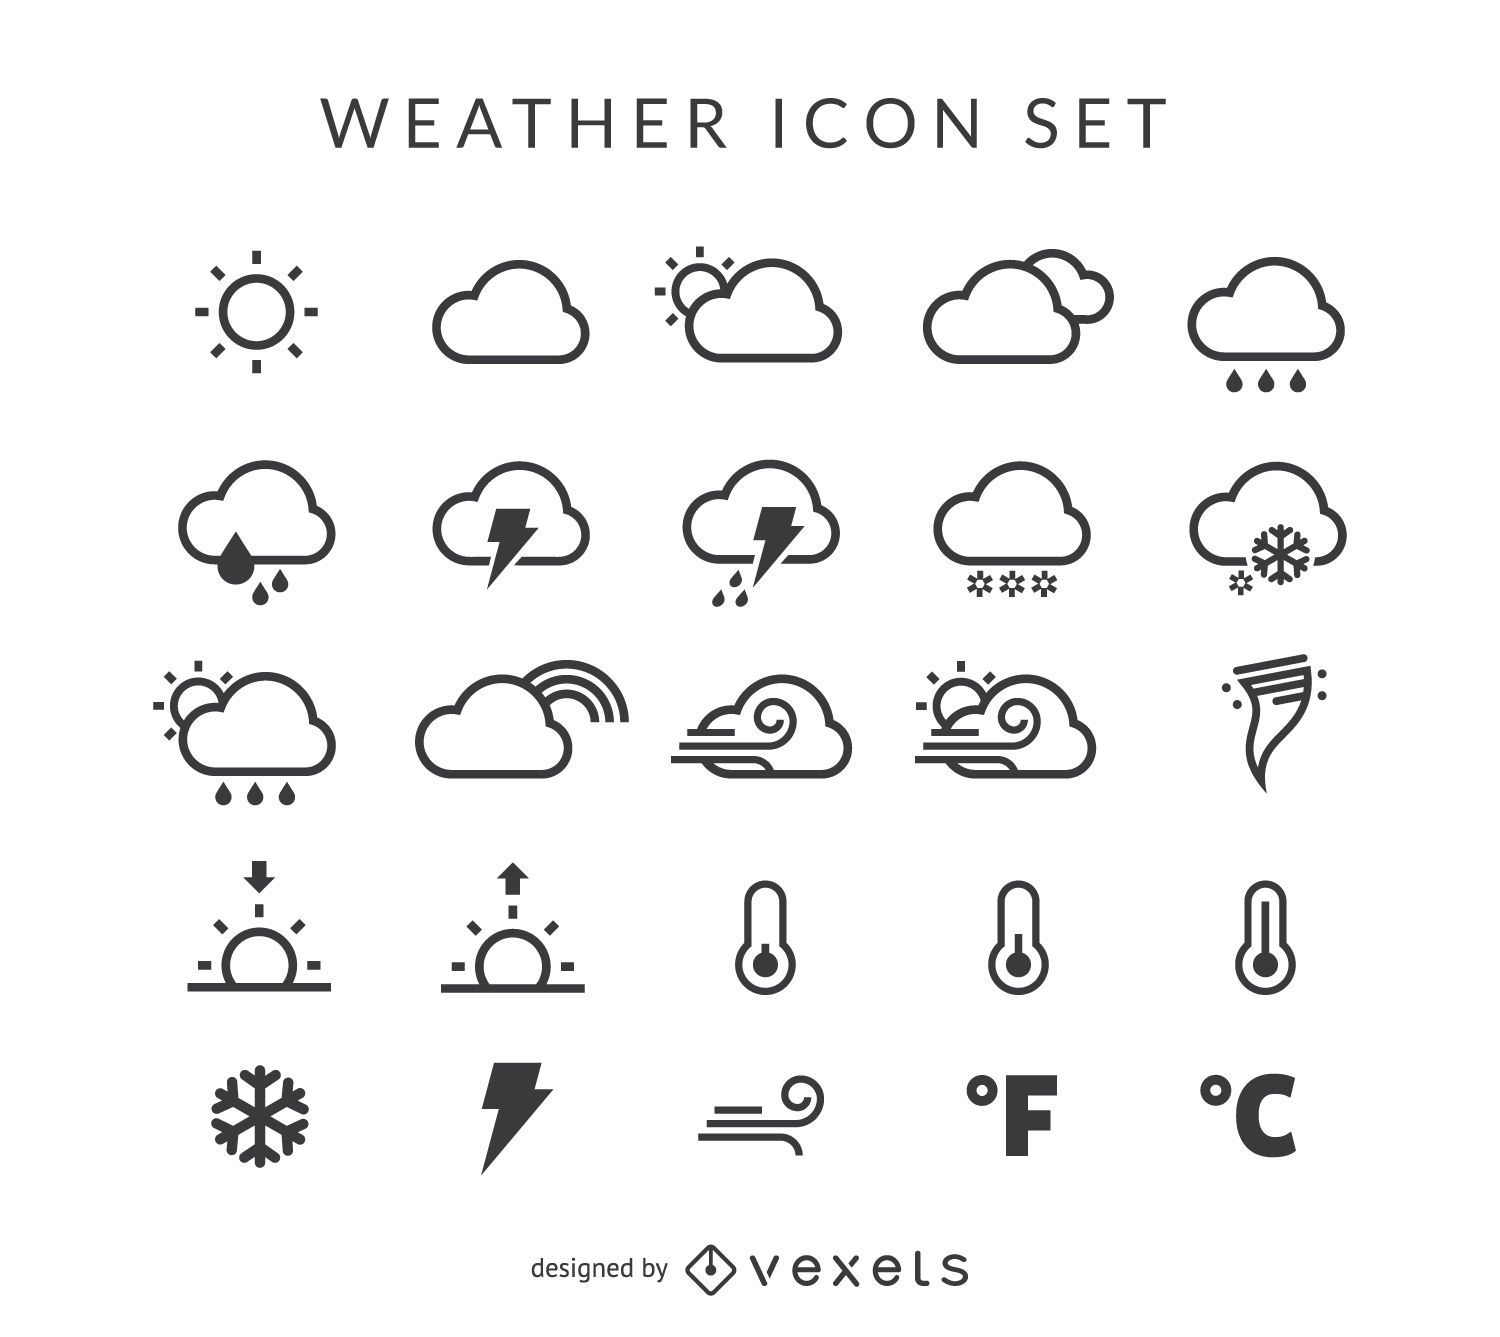 Weather icon set - Vector download